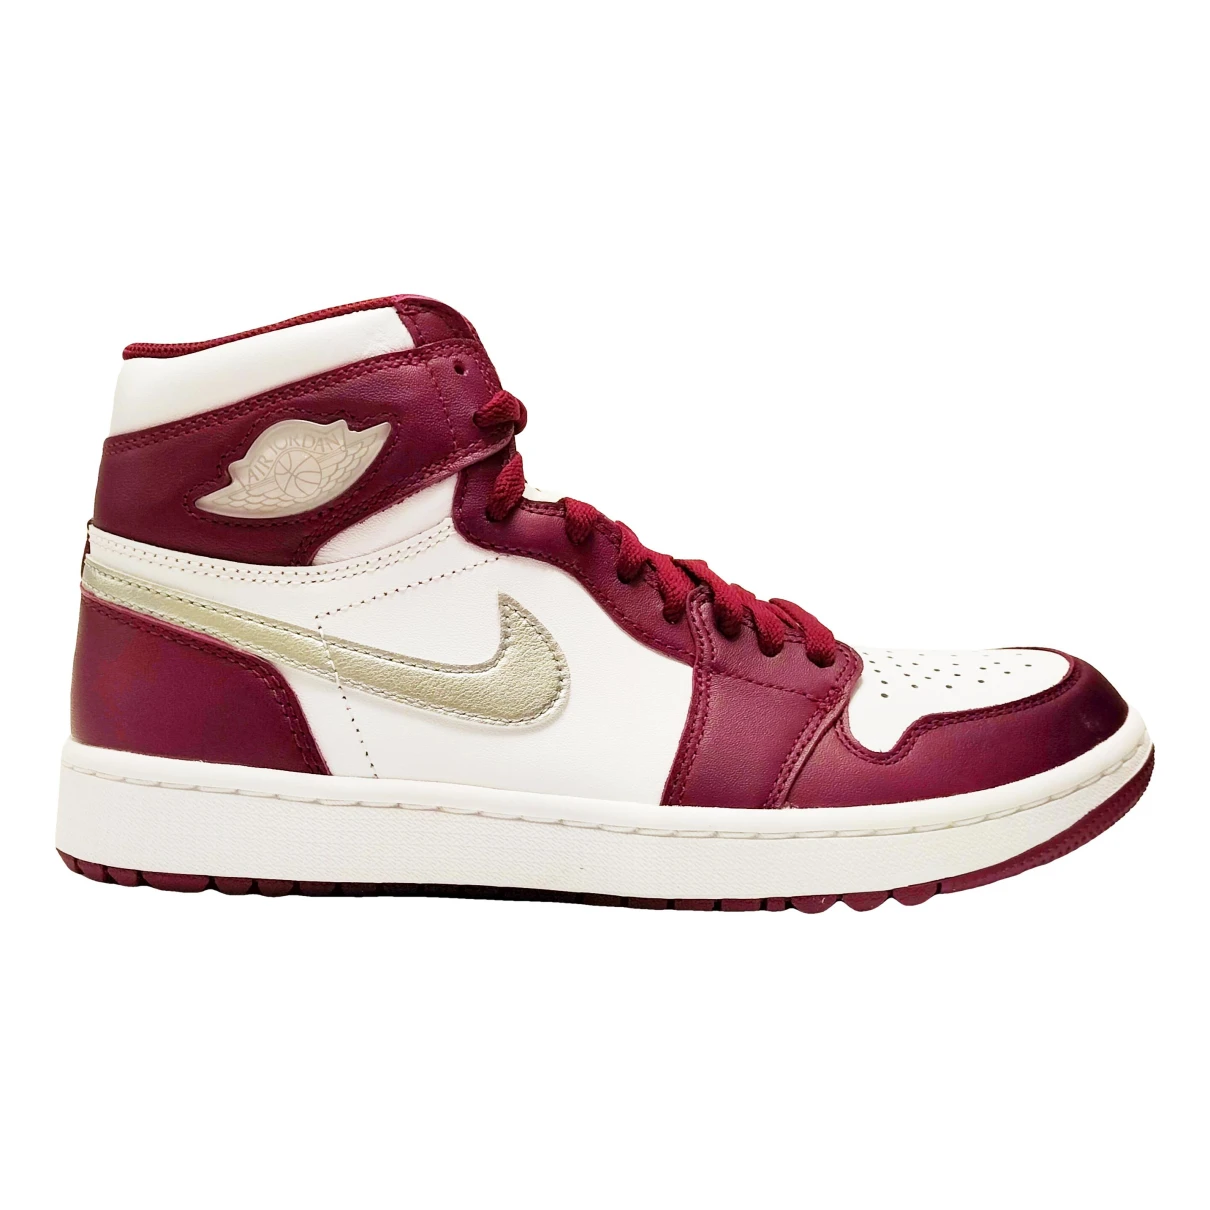 Pre-owned Jordan 1 Leather High Trainers In Burgundy